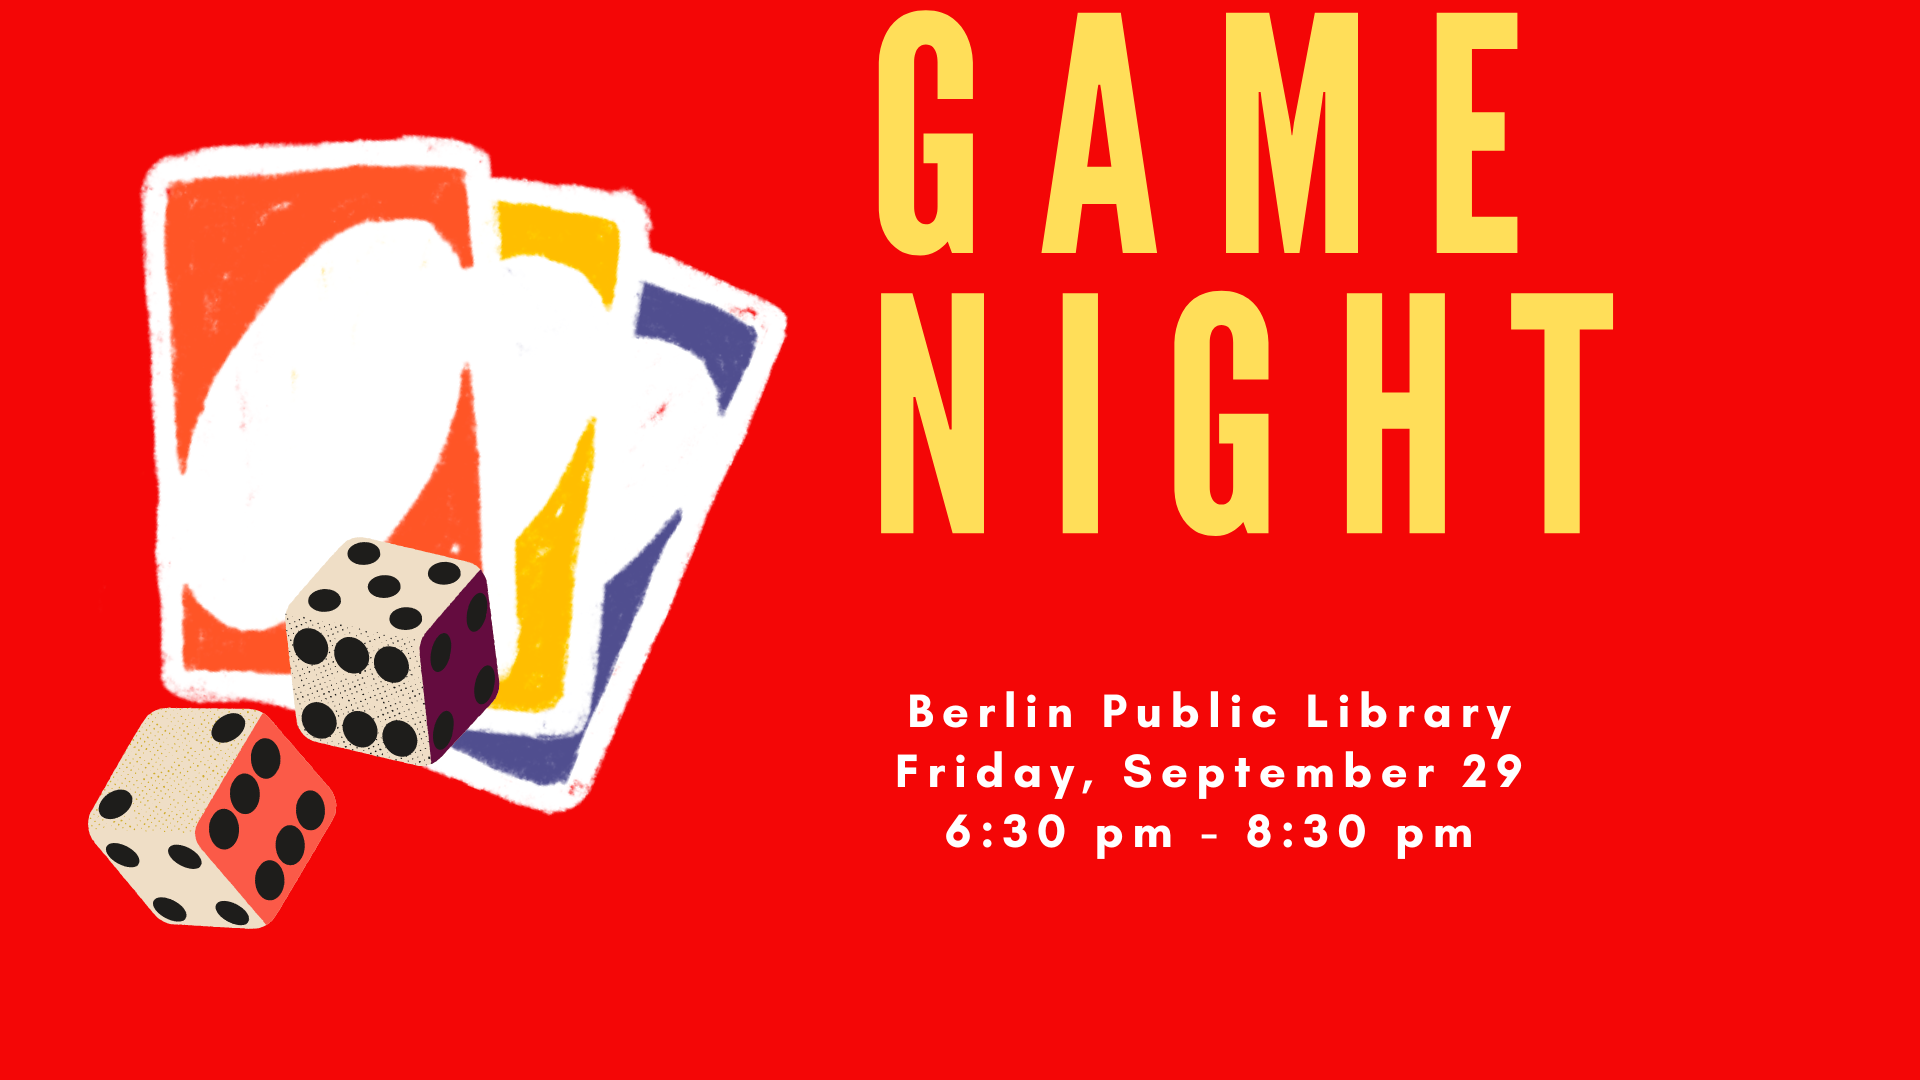 Yellow words on red background read: Game Night. Berlin Public Library. Friday September 29. 6:30 - 8:30 pm.